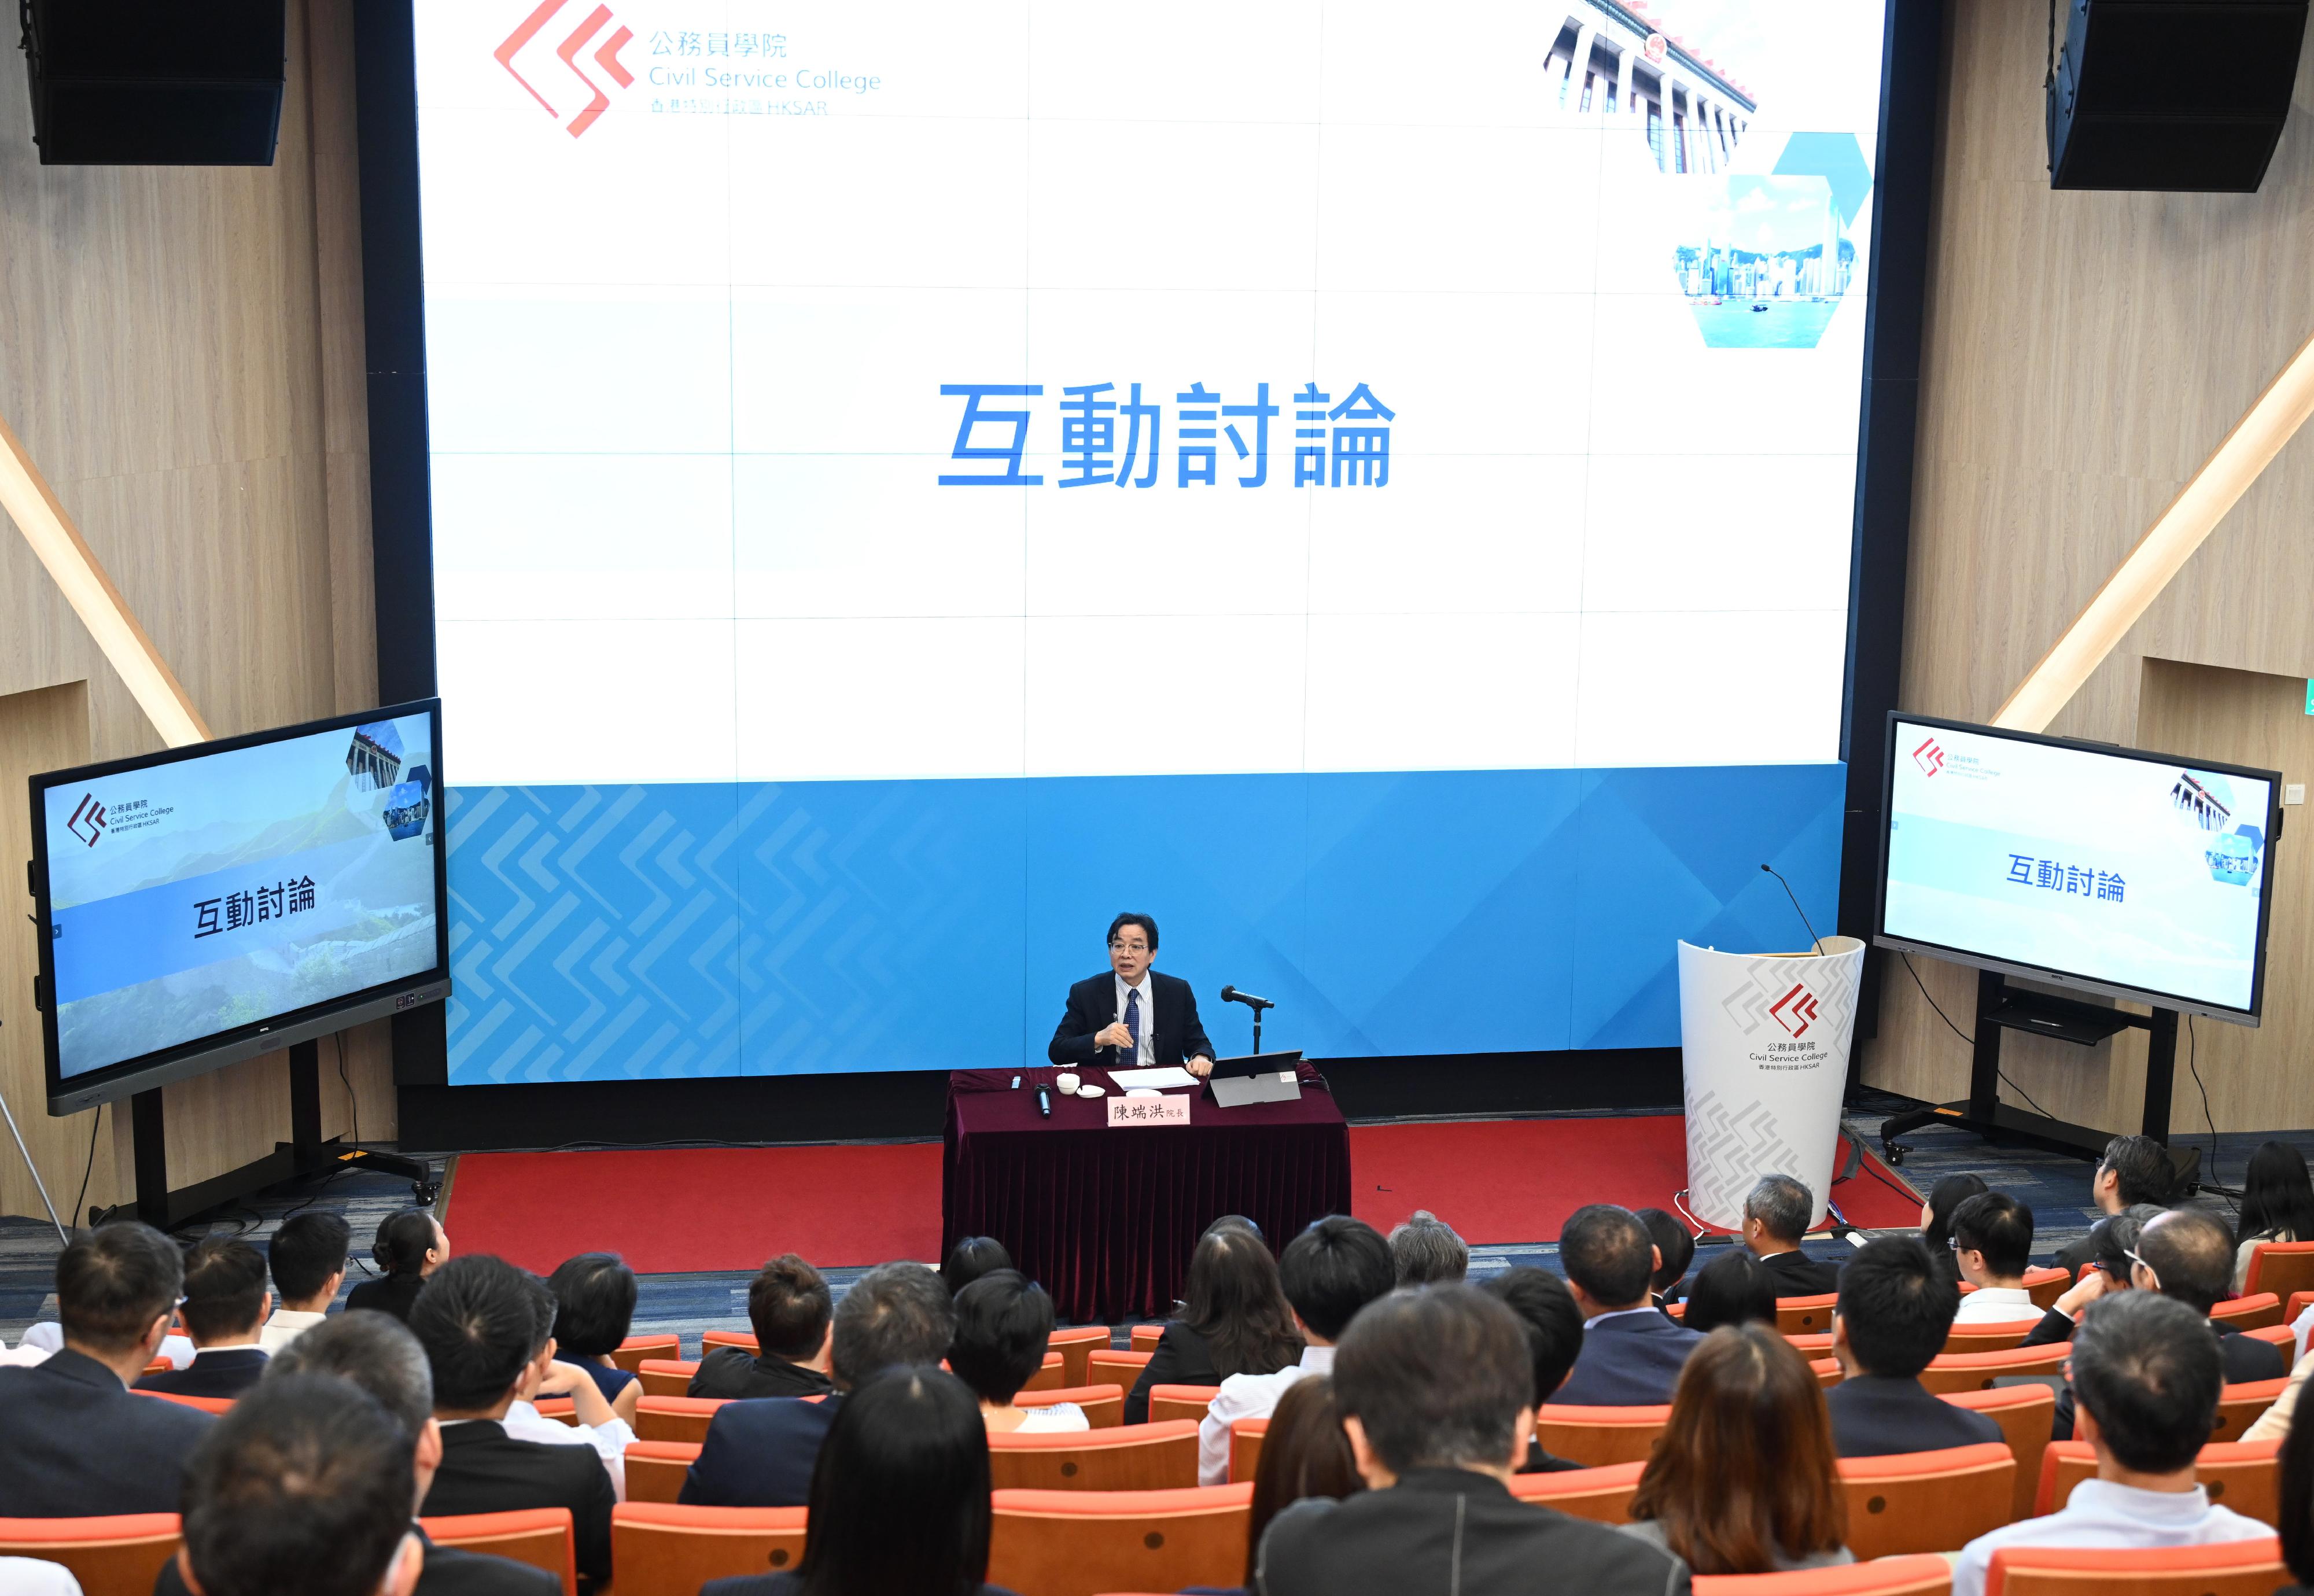 The Civil Service College of the Civil Service Bureau, in collaboration with the Institute for Hong Kong and Macau Studies, Peking University, launched an in-depth programme on "one country, two systems" and the contemporary China and organised a lecture on the topic of "The Chinese Constitutional System: the Country's Authority Structure" today (August 22). Around 70 civil servants at the rank of Directorate Pay Scale Point 1 and 2 attended the in-depth programme. In addition, about 100 politically appointed officials and other directorate officers enrolled and sat in the programme via video conferencing.